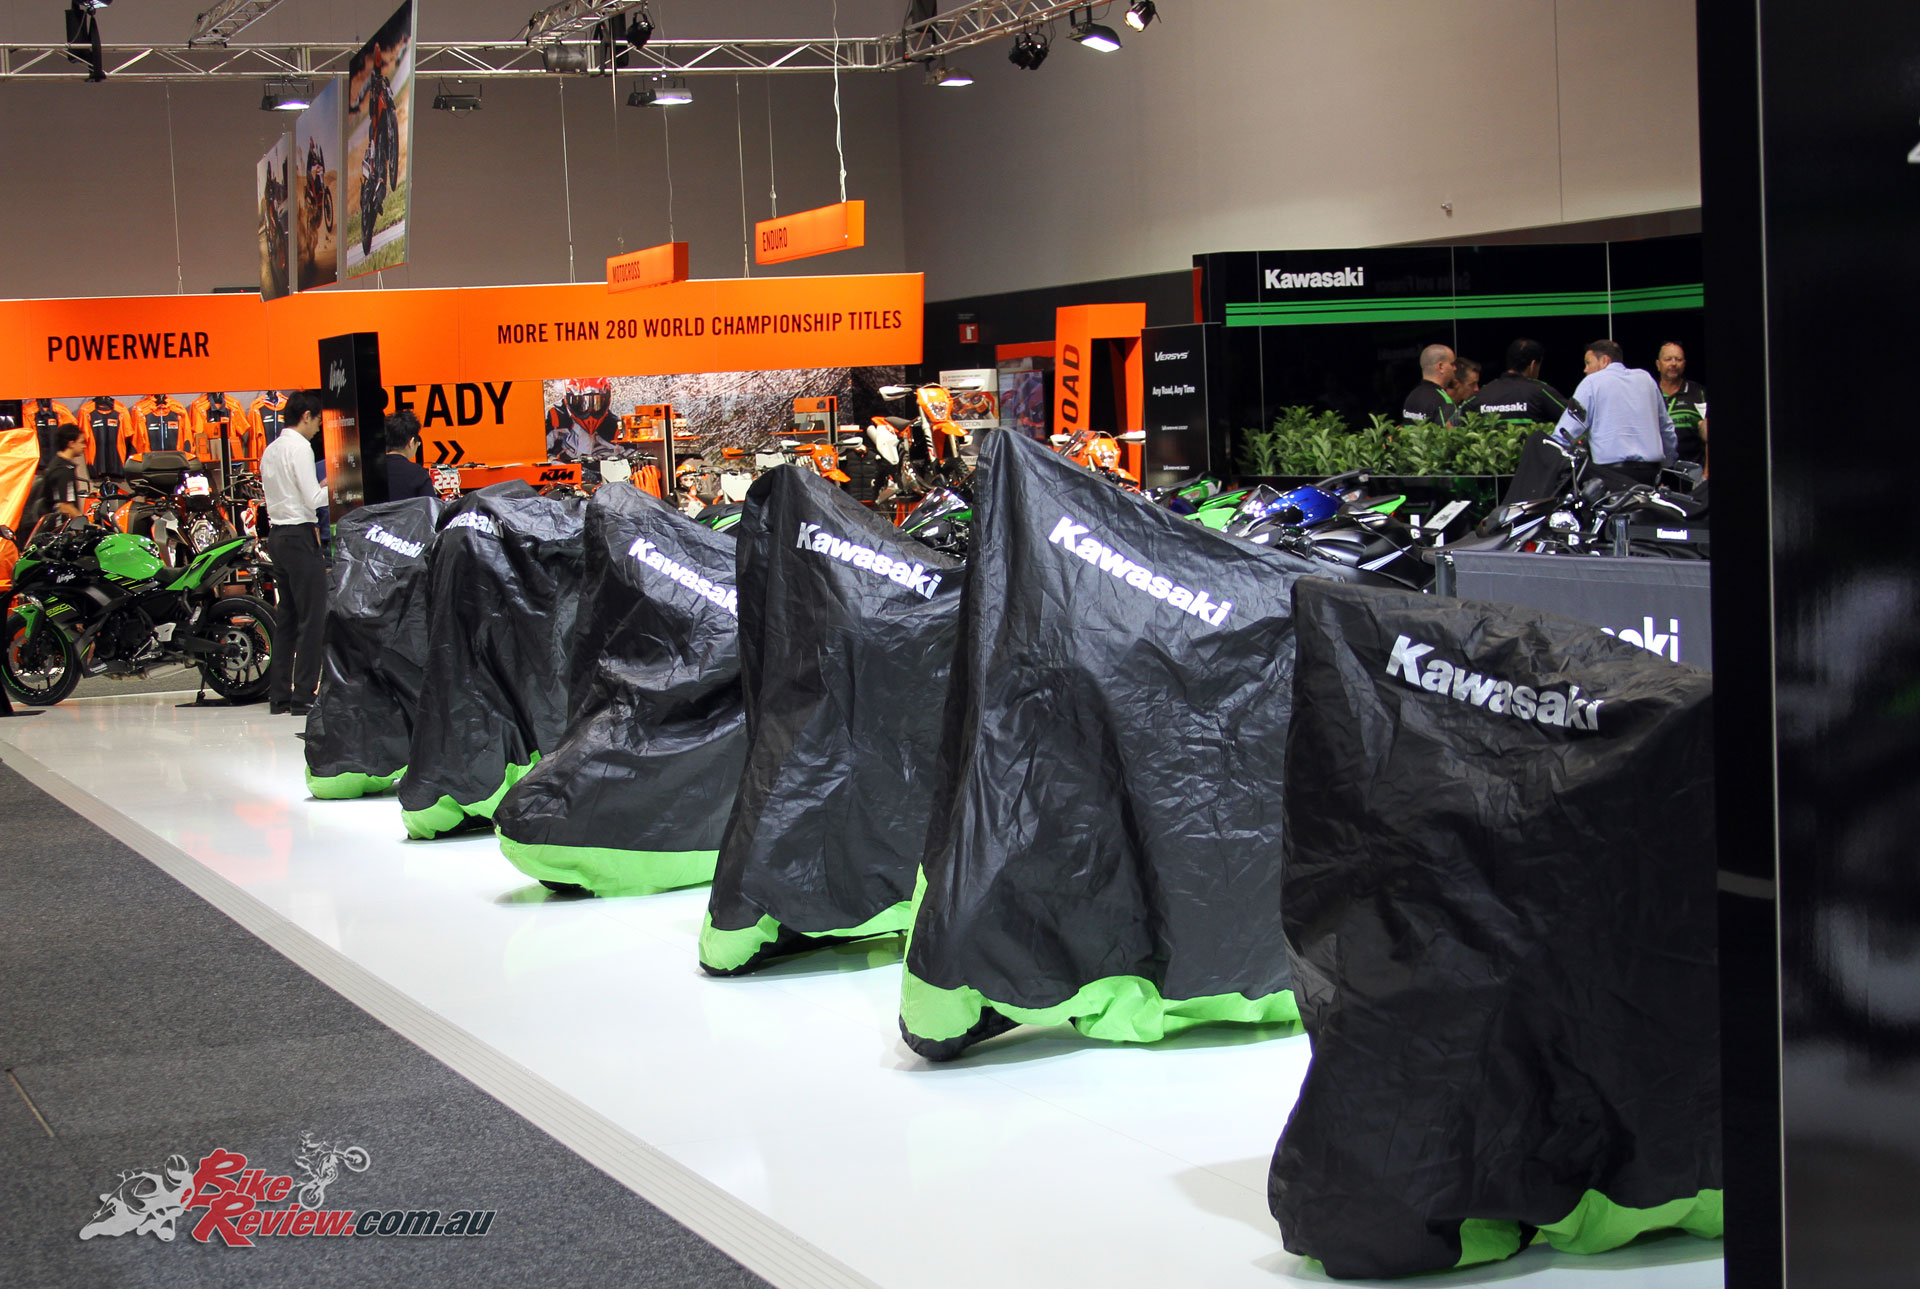 Kawasaki did an early unveil prior to the gates opening, meaning all new models were already on display for the first wave